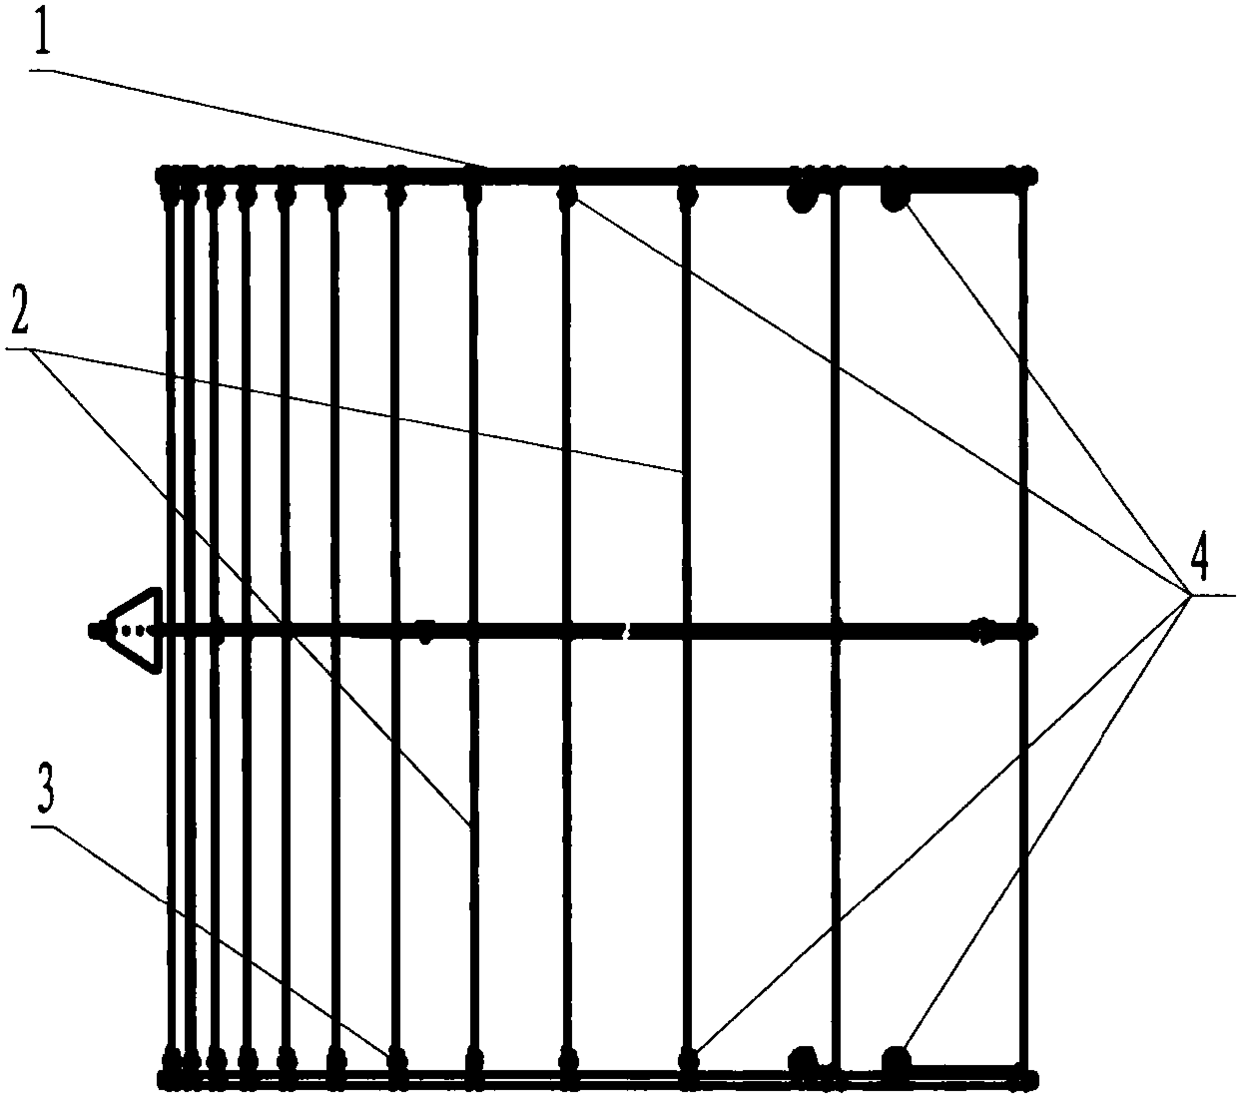 A Logarithmic Periodic Antenna Automatically Unfolding and Storing